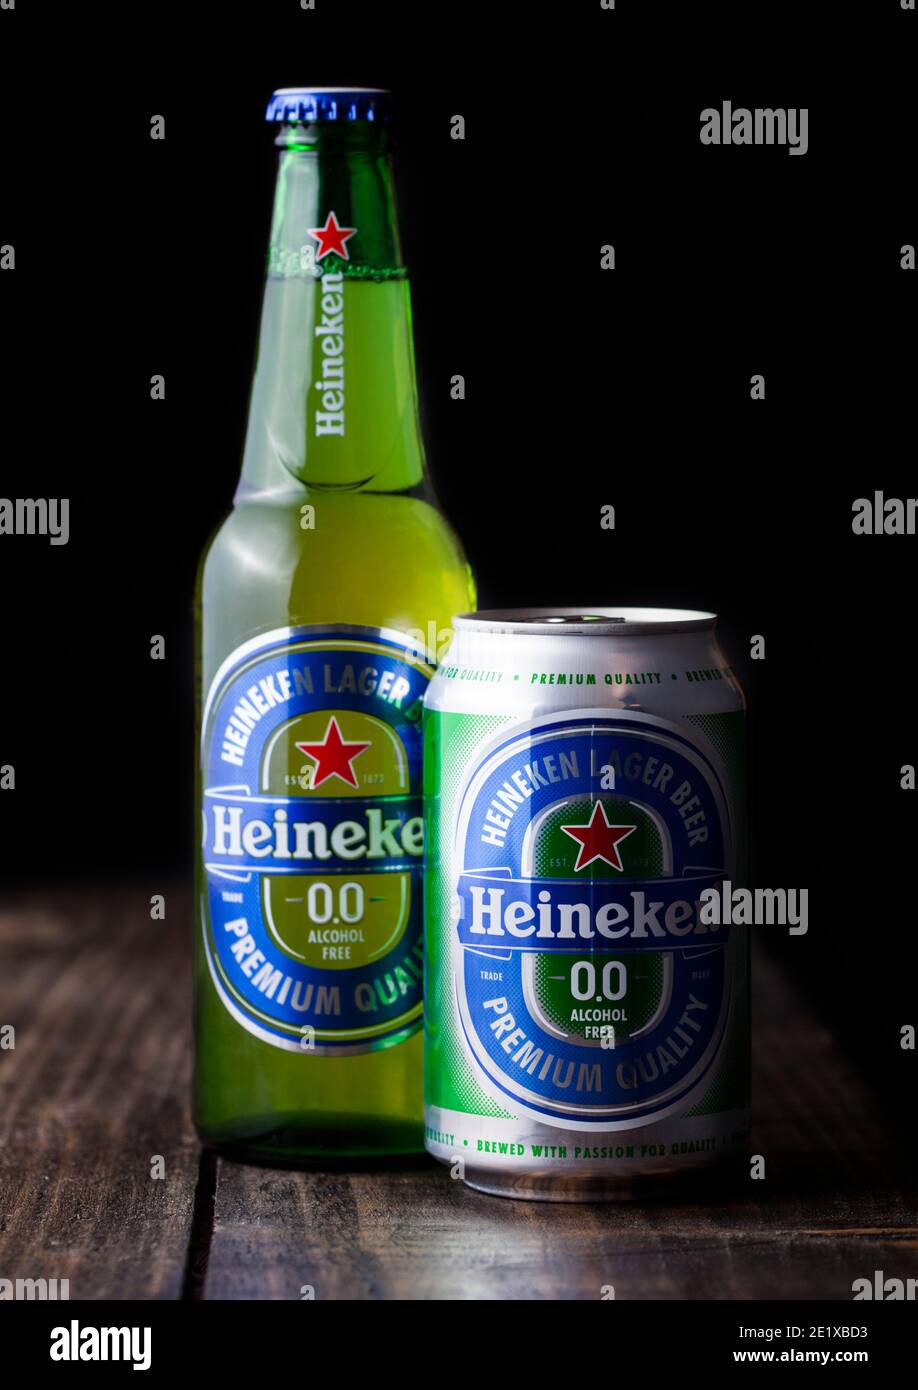 LONDON, UK - APRIL 27, 2018: Bottle and aluminium can of Heineken Alcohol free Lager Beer on dark wooden background. Heineken is the flagship product Stock Photo